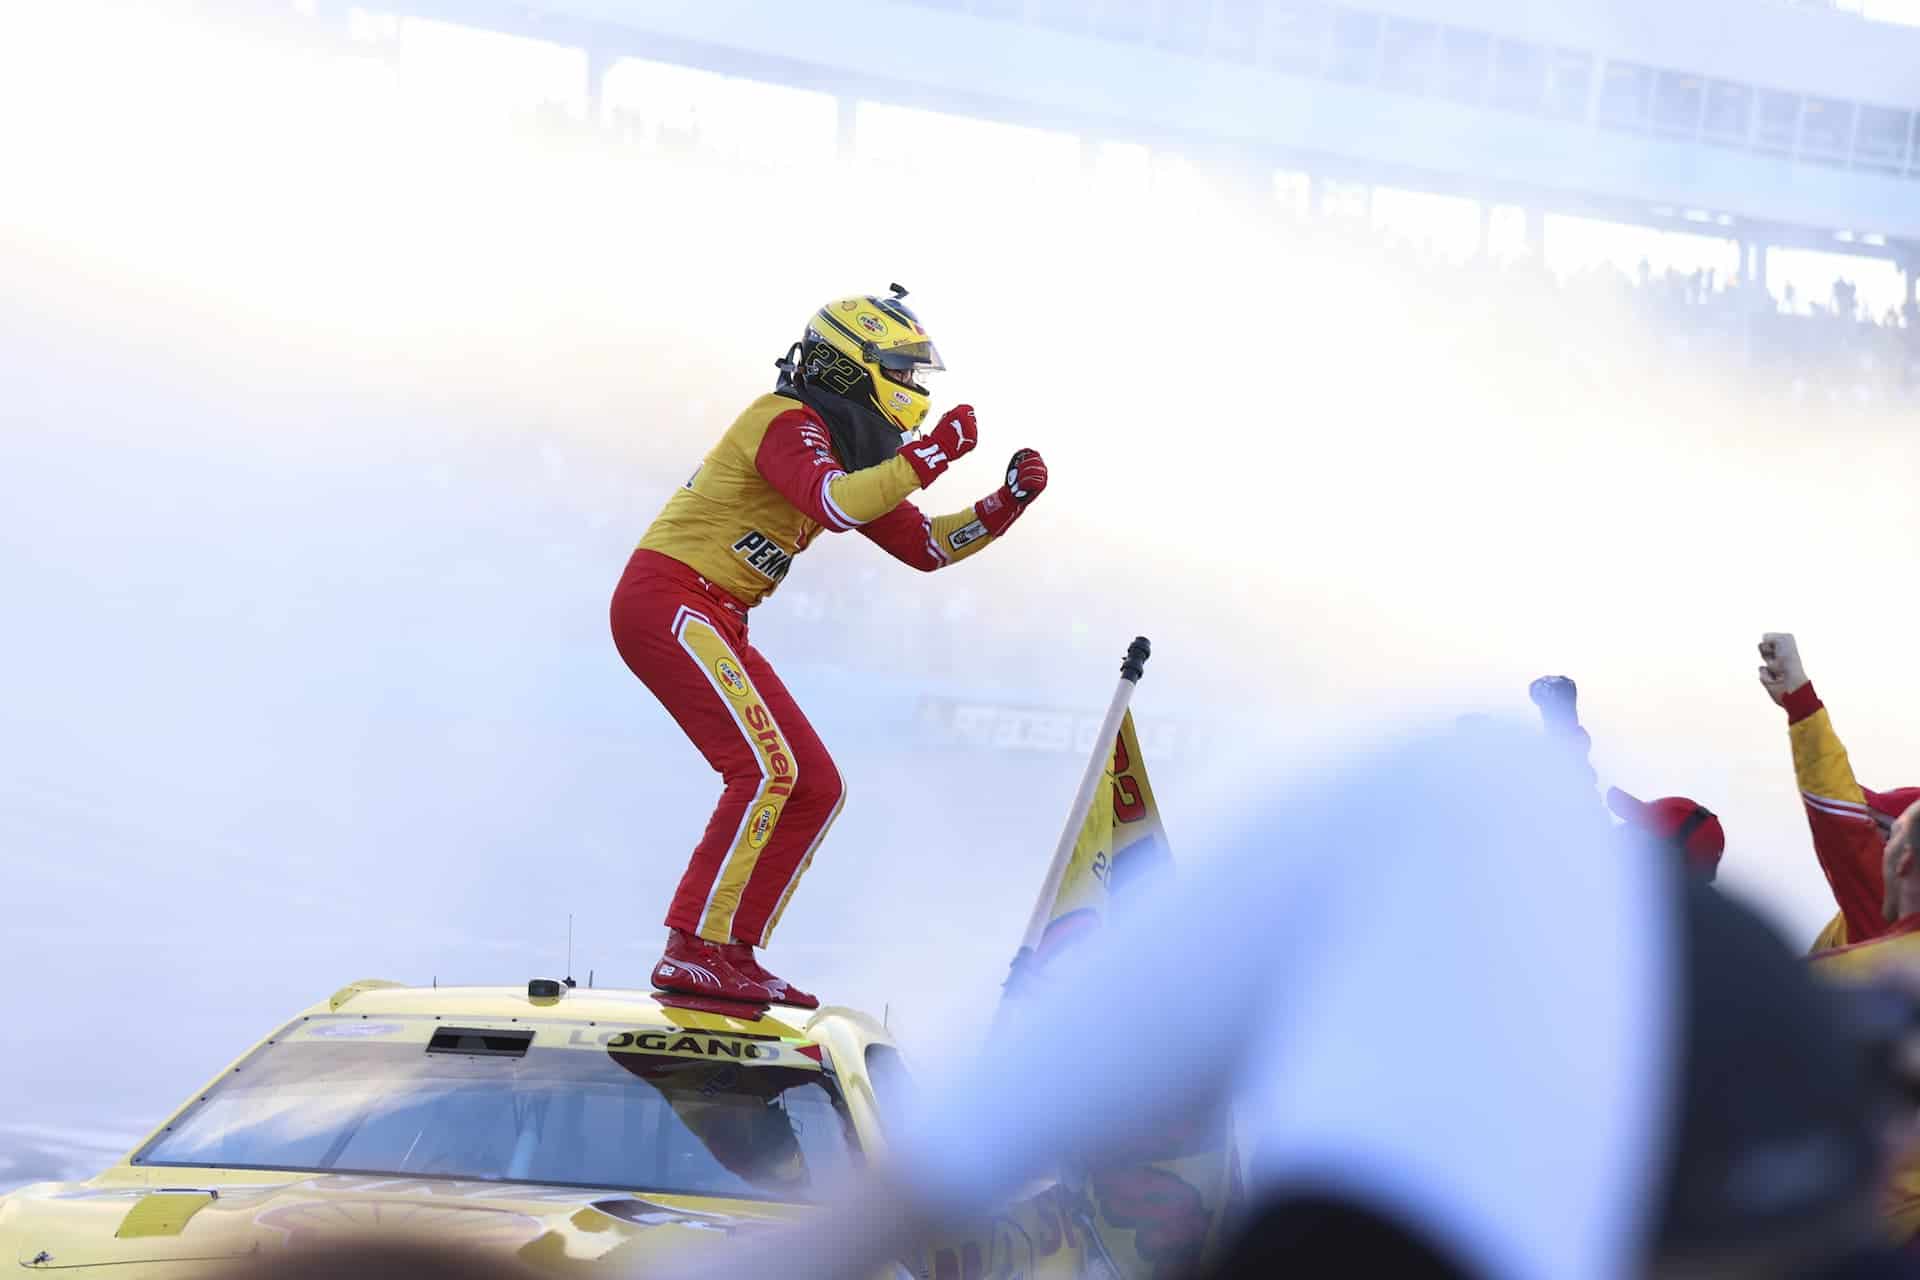 Joey Logano wins the race and the 2022 NASCAR Cup Series championship at Phoenix Raceway. Photo by Rachel Schuoler / Kickin' the Tires